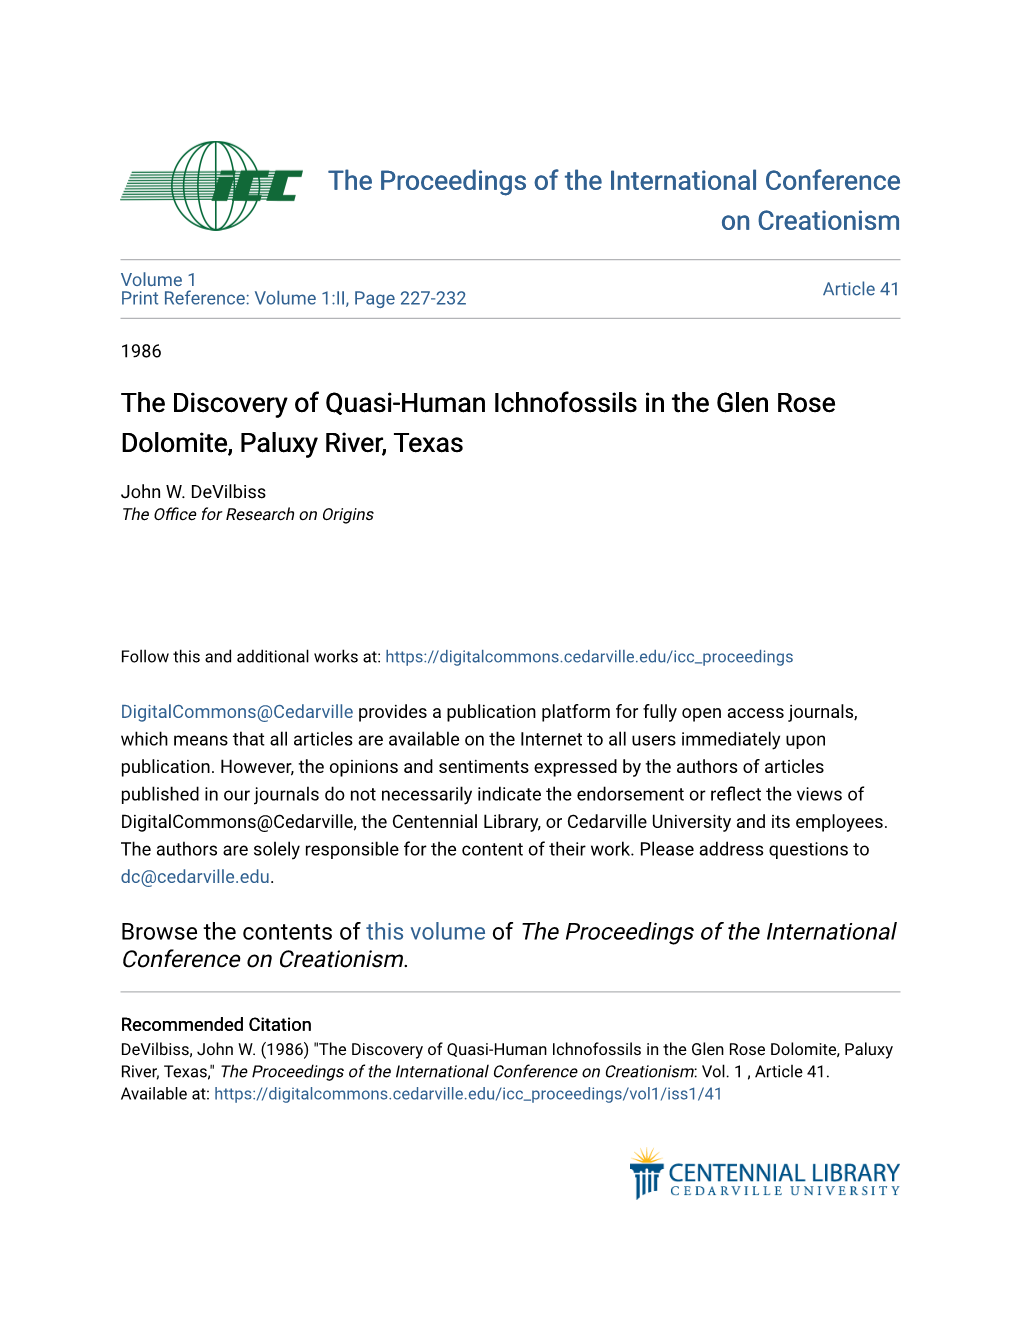 The Discovery of Quasi-Human Ichnofossils in the Glen Rose Dolomite, Paluxy River, Texas